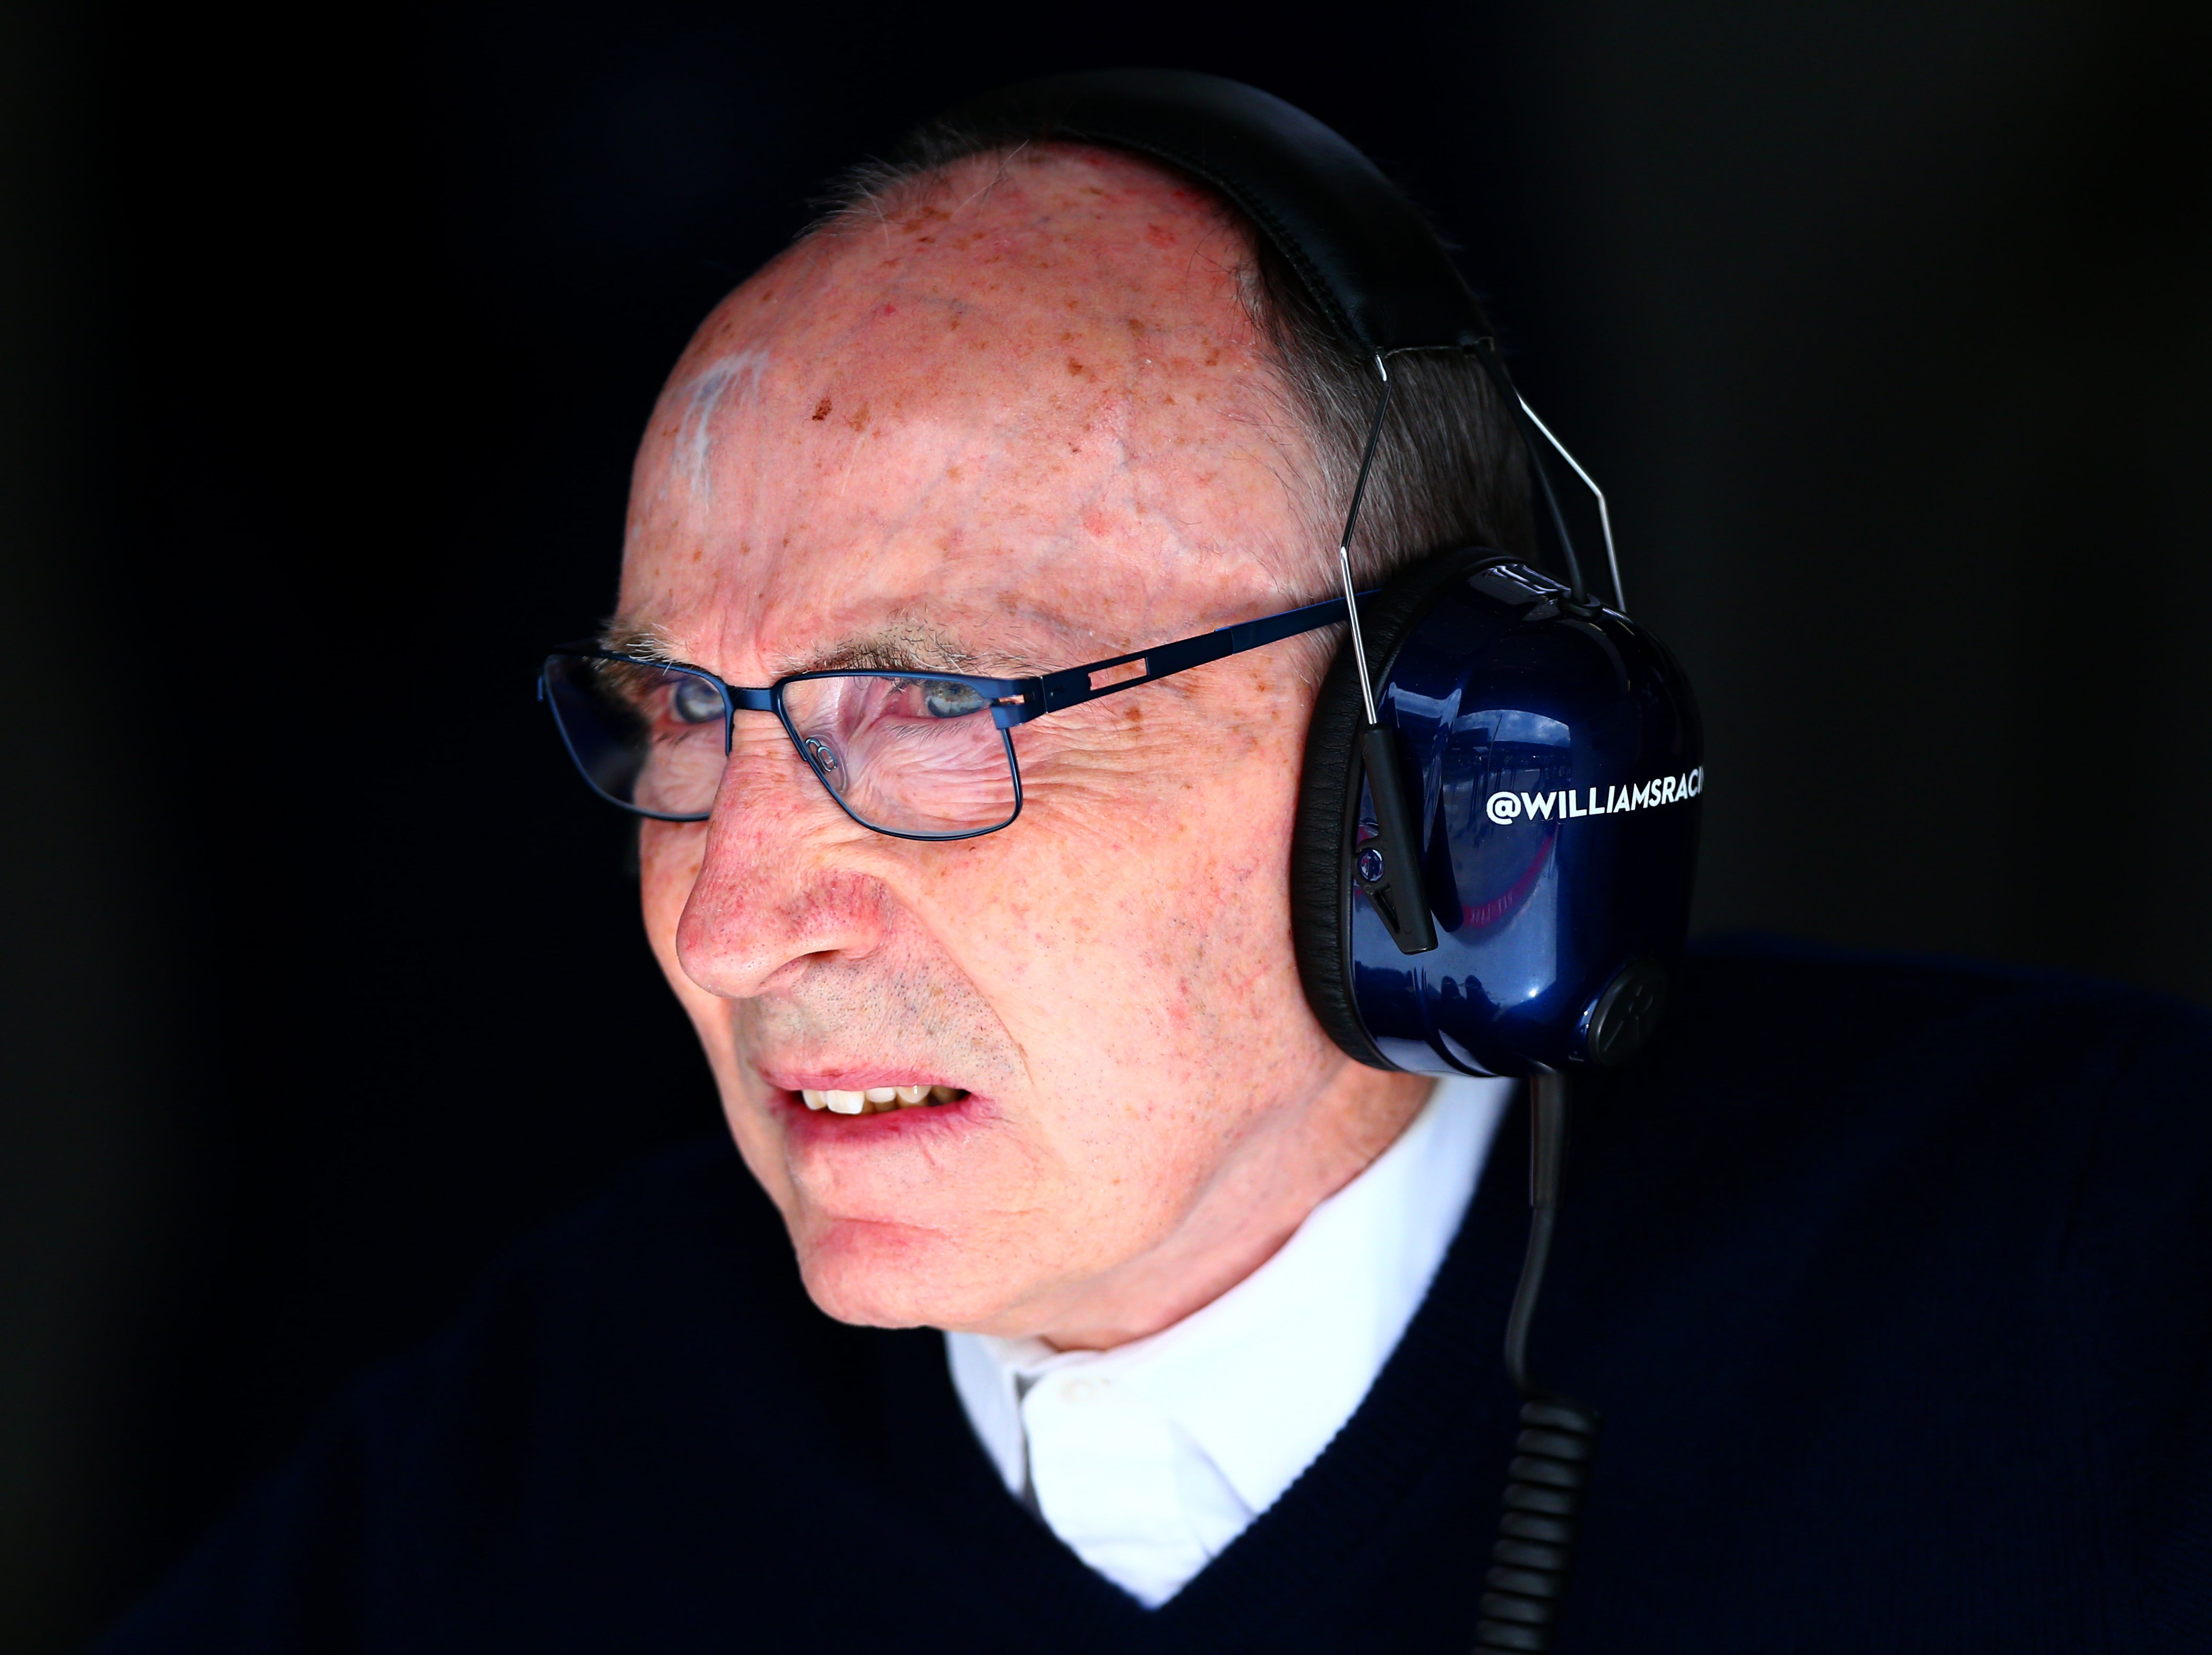 Sir Frank Williams, founder of the Williams F1 team